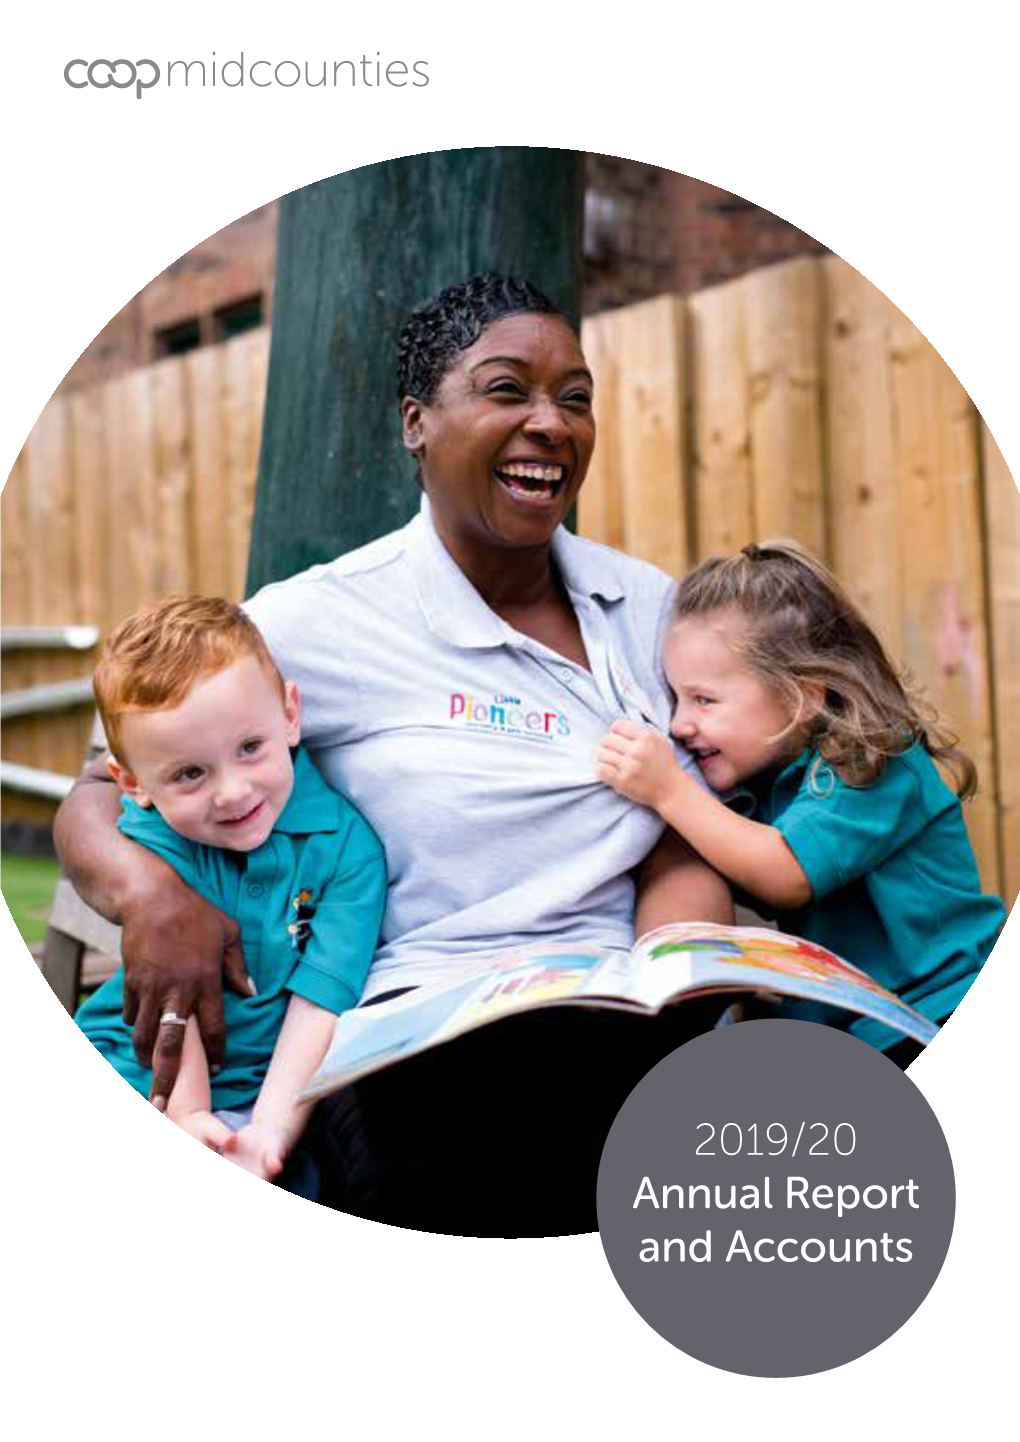 2019/20 Annual Report and Accounts Contents